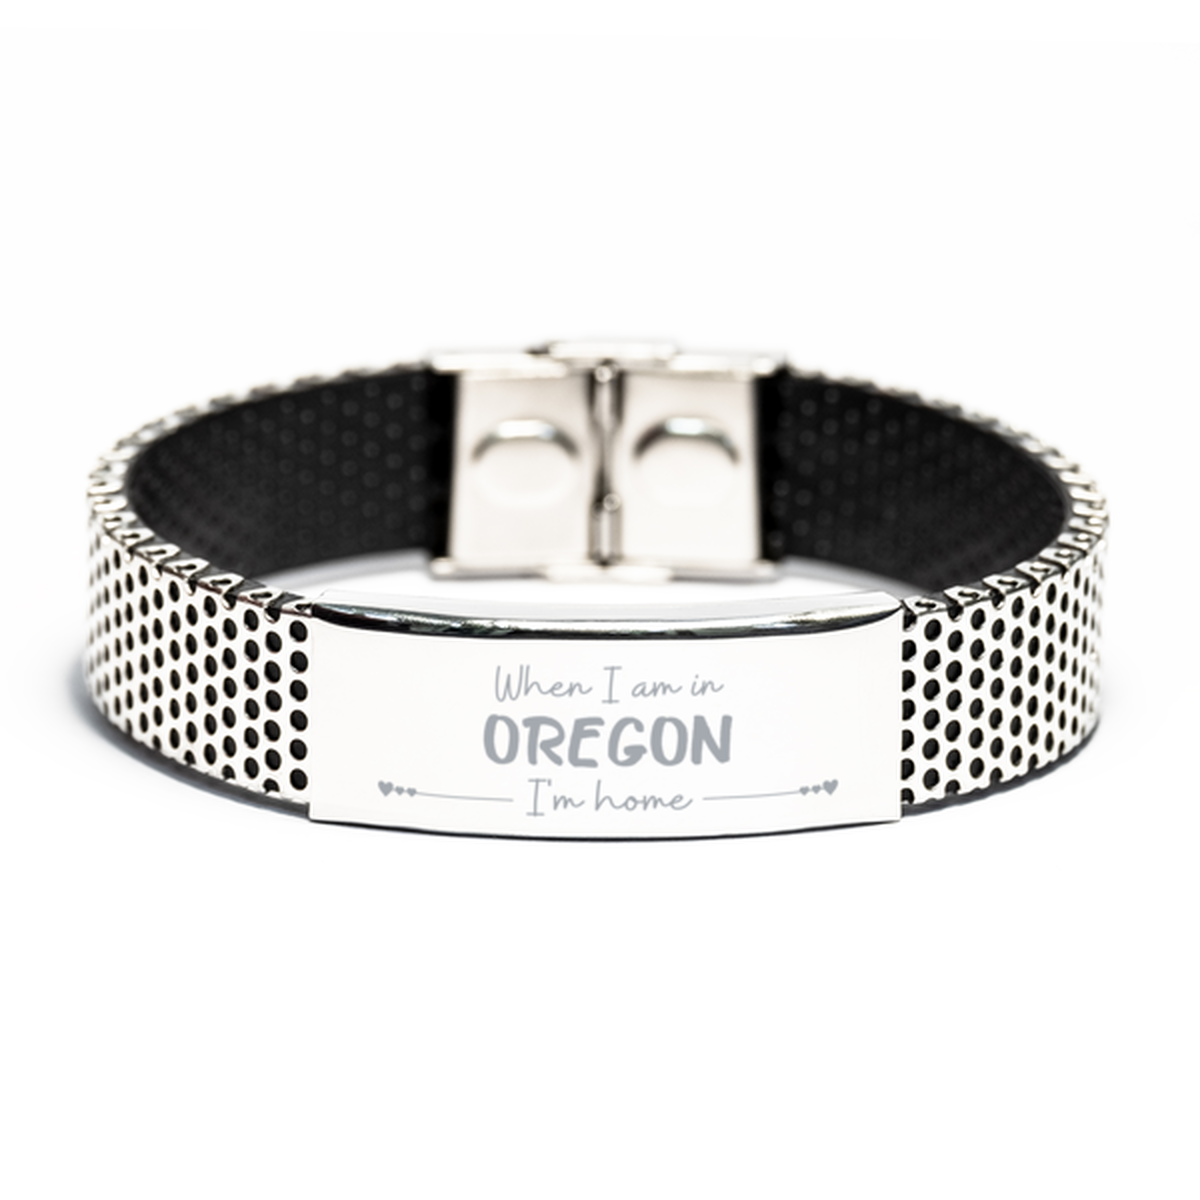 When I am in Oregon I'm home Stainless Steel Bracelet, Cheap Gifts For Oregon, State Oregon Birthday Gifts for Friends Coworker